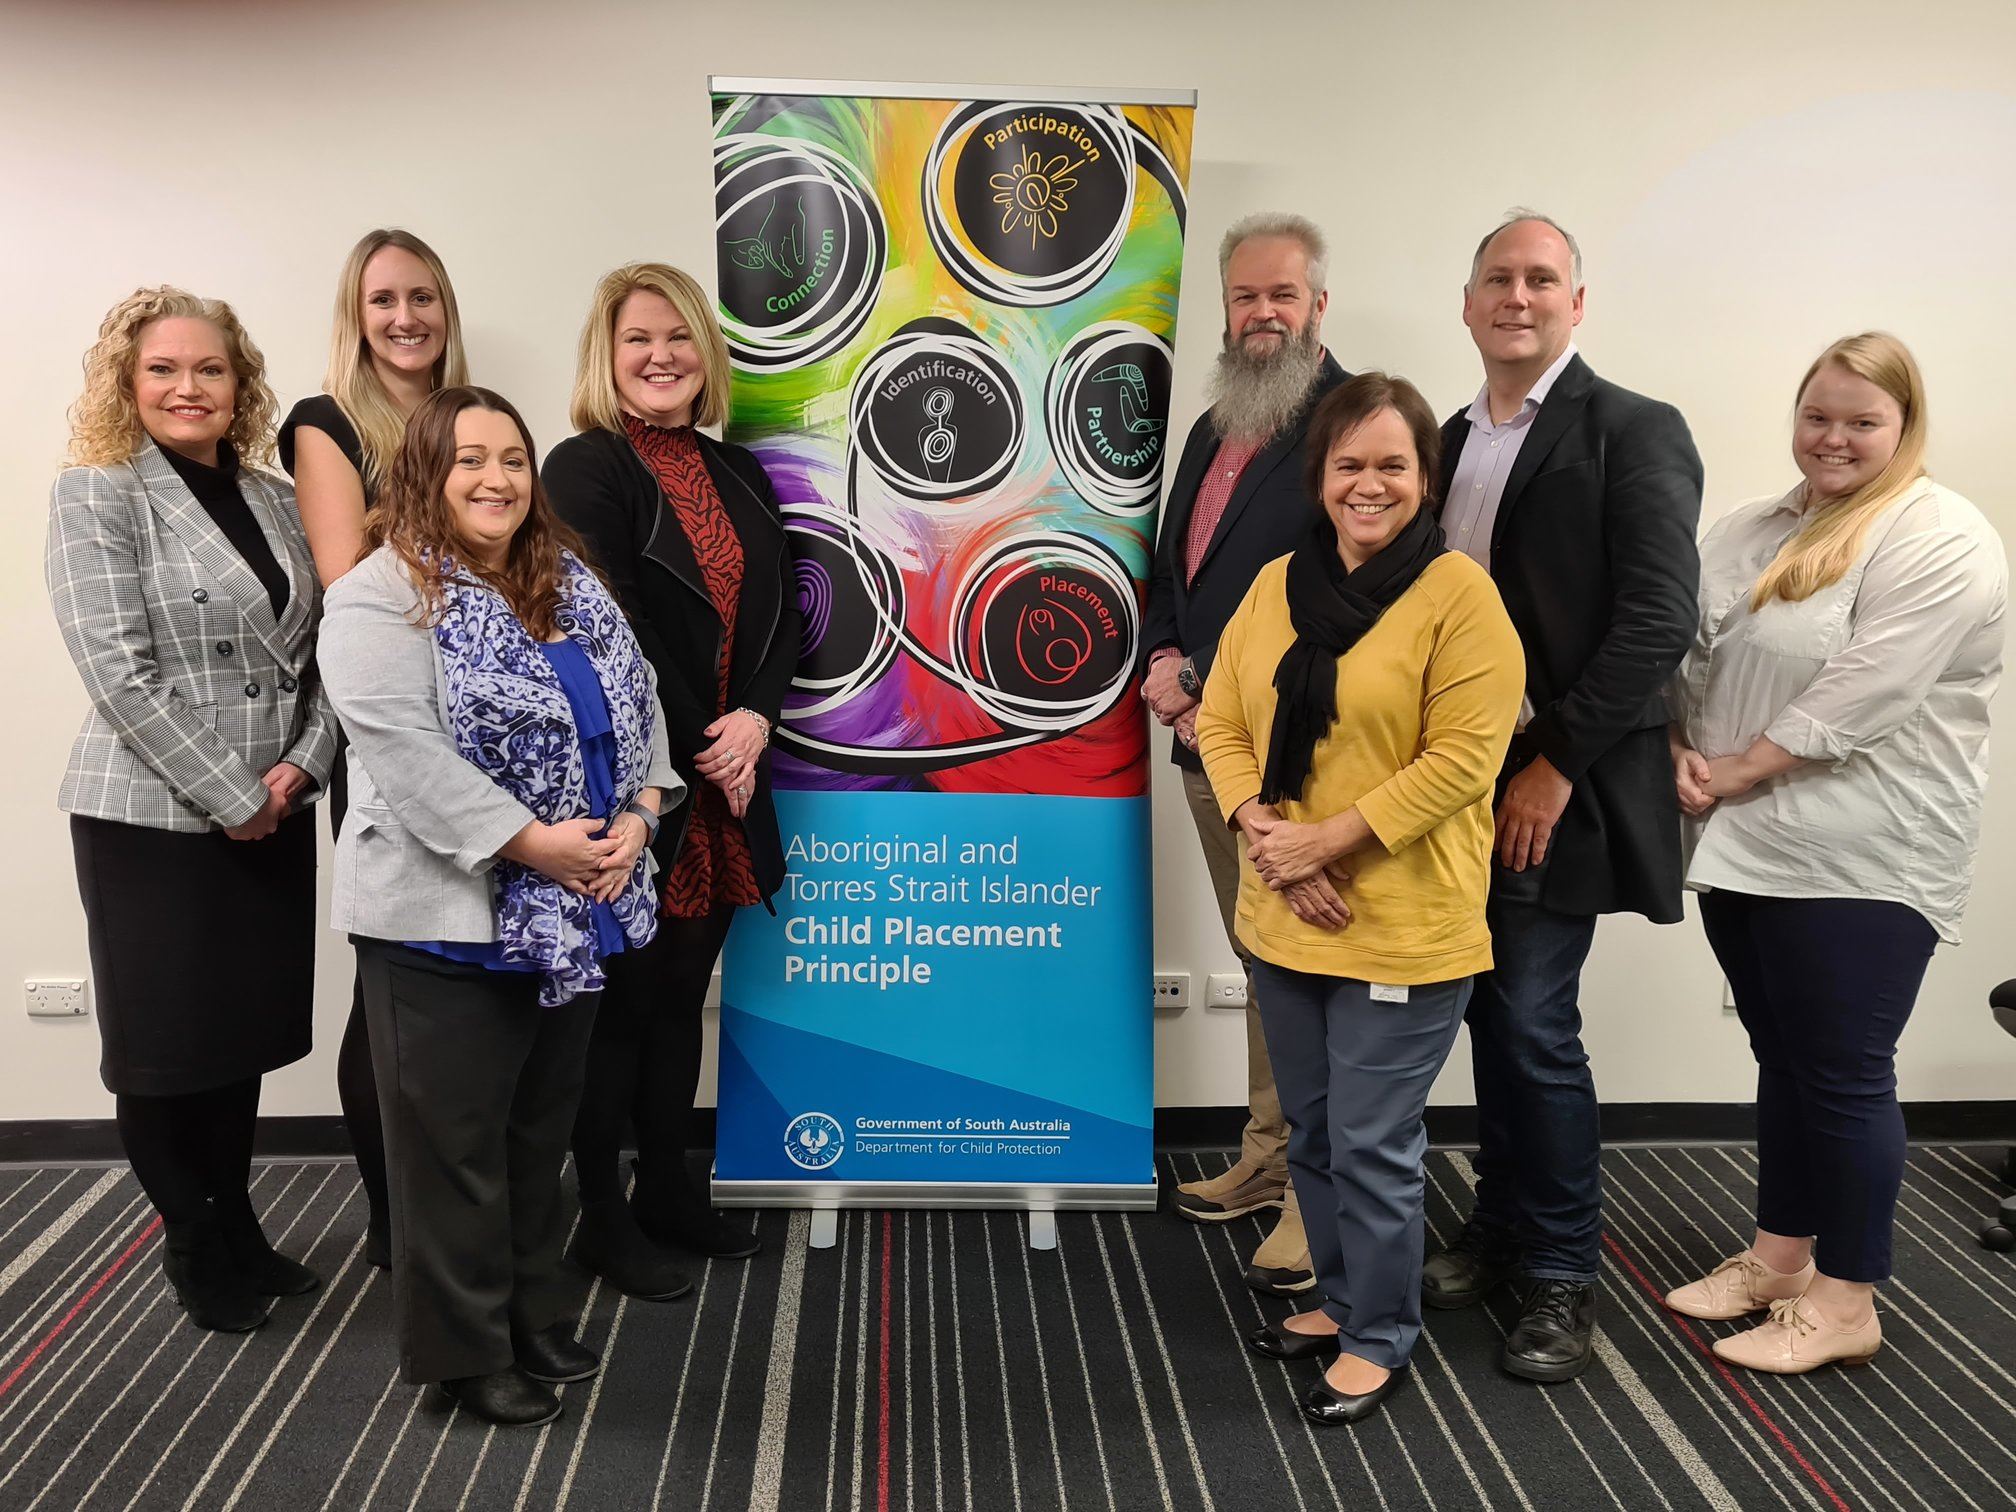 8 Department for Child Protection staff stand near a pull up banner with a colourful representation of the Aboriginal Child Placement Principle.